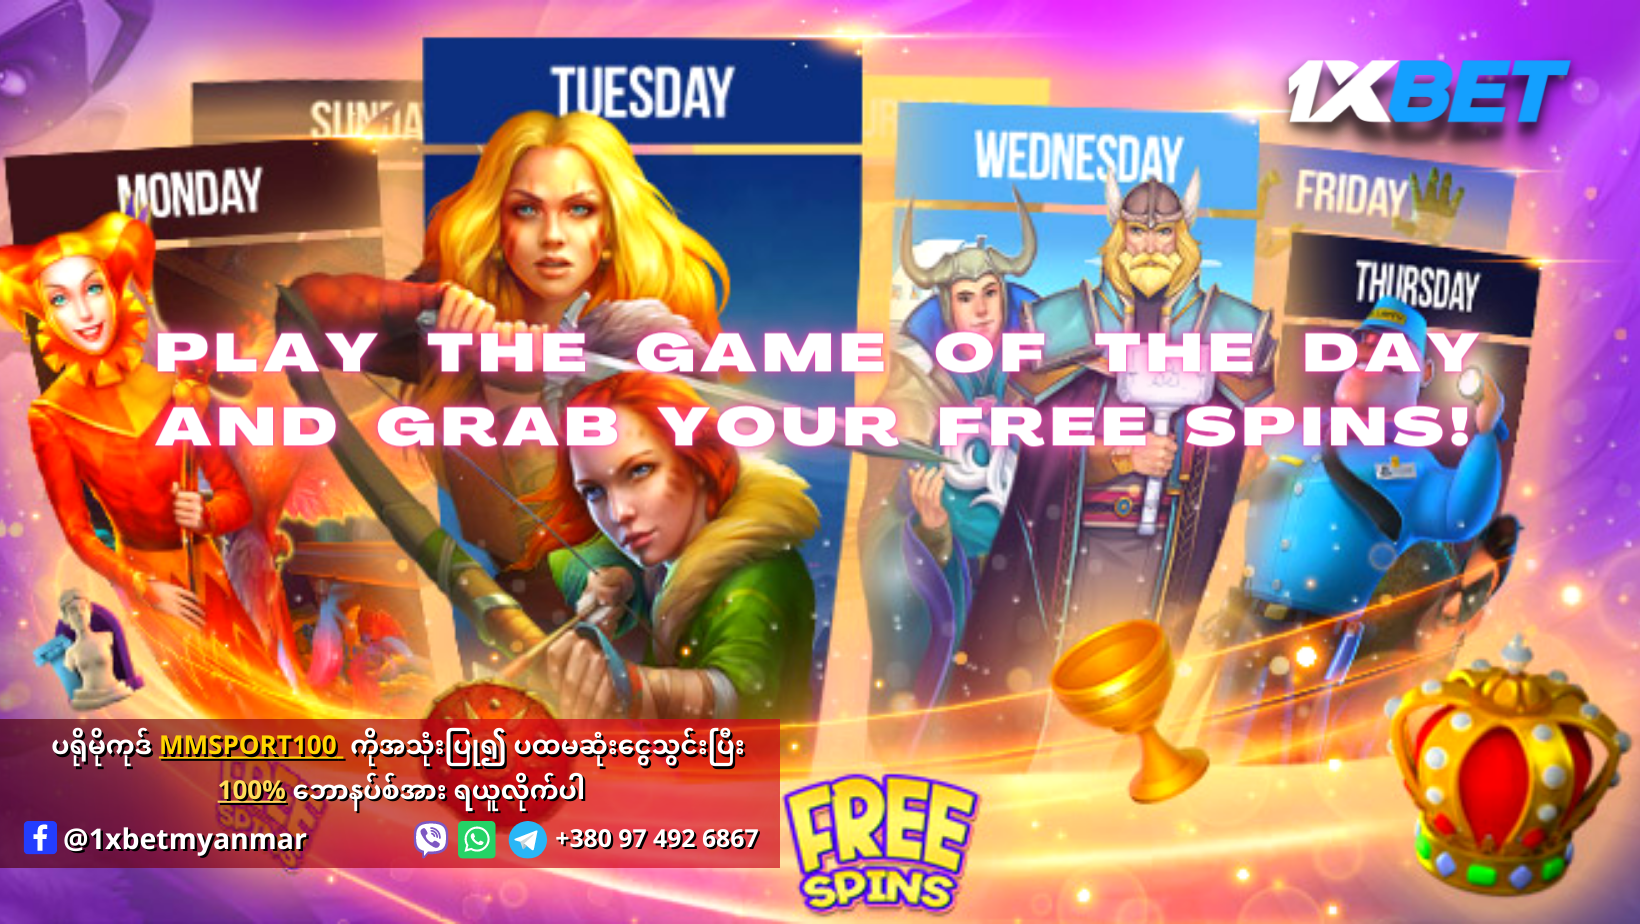 Free spins promotion